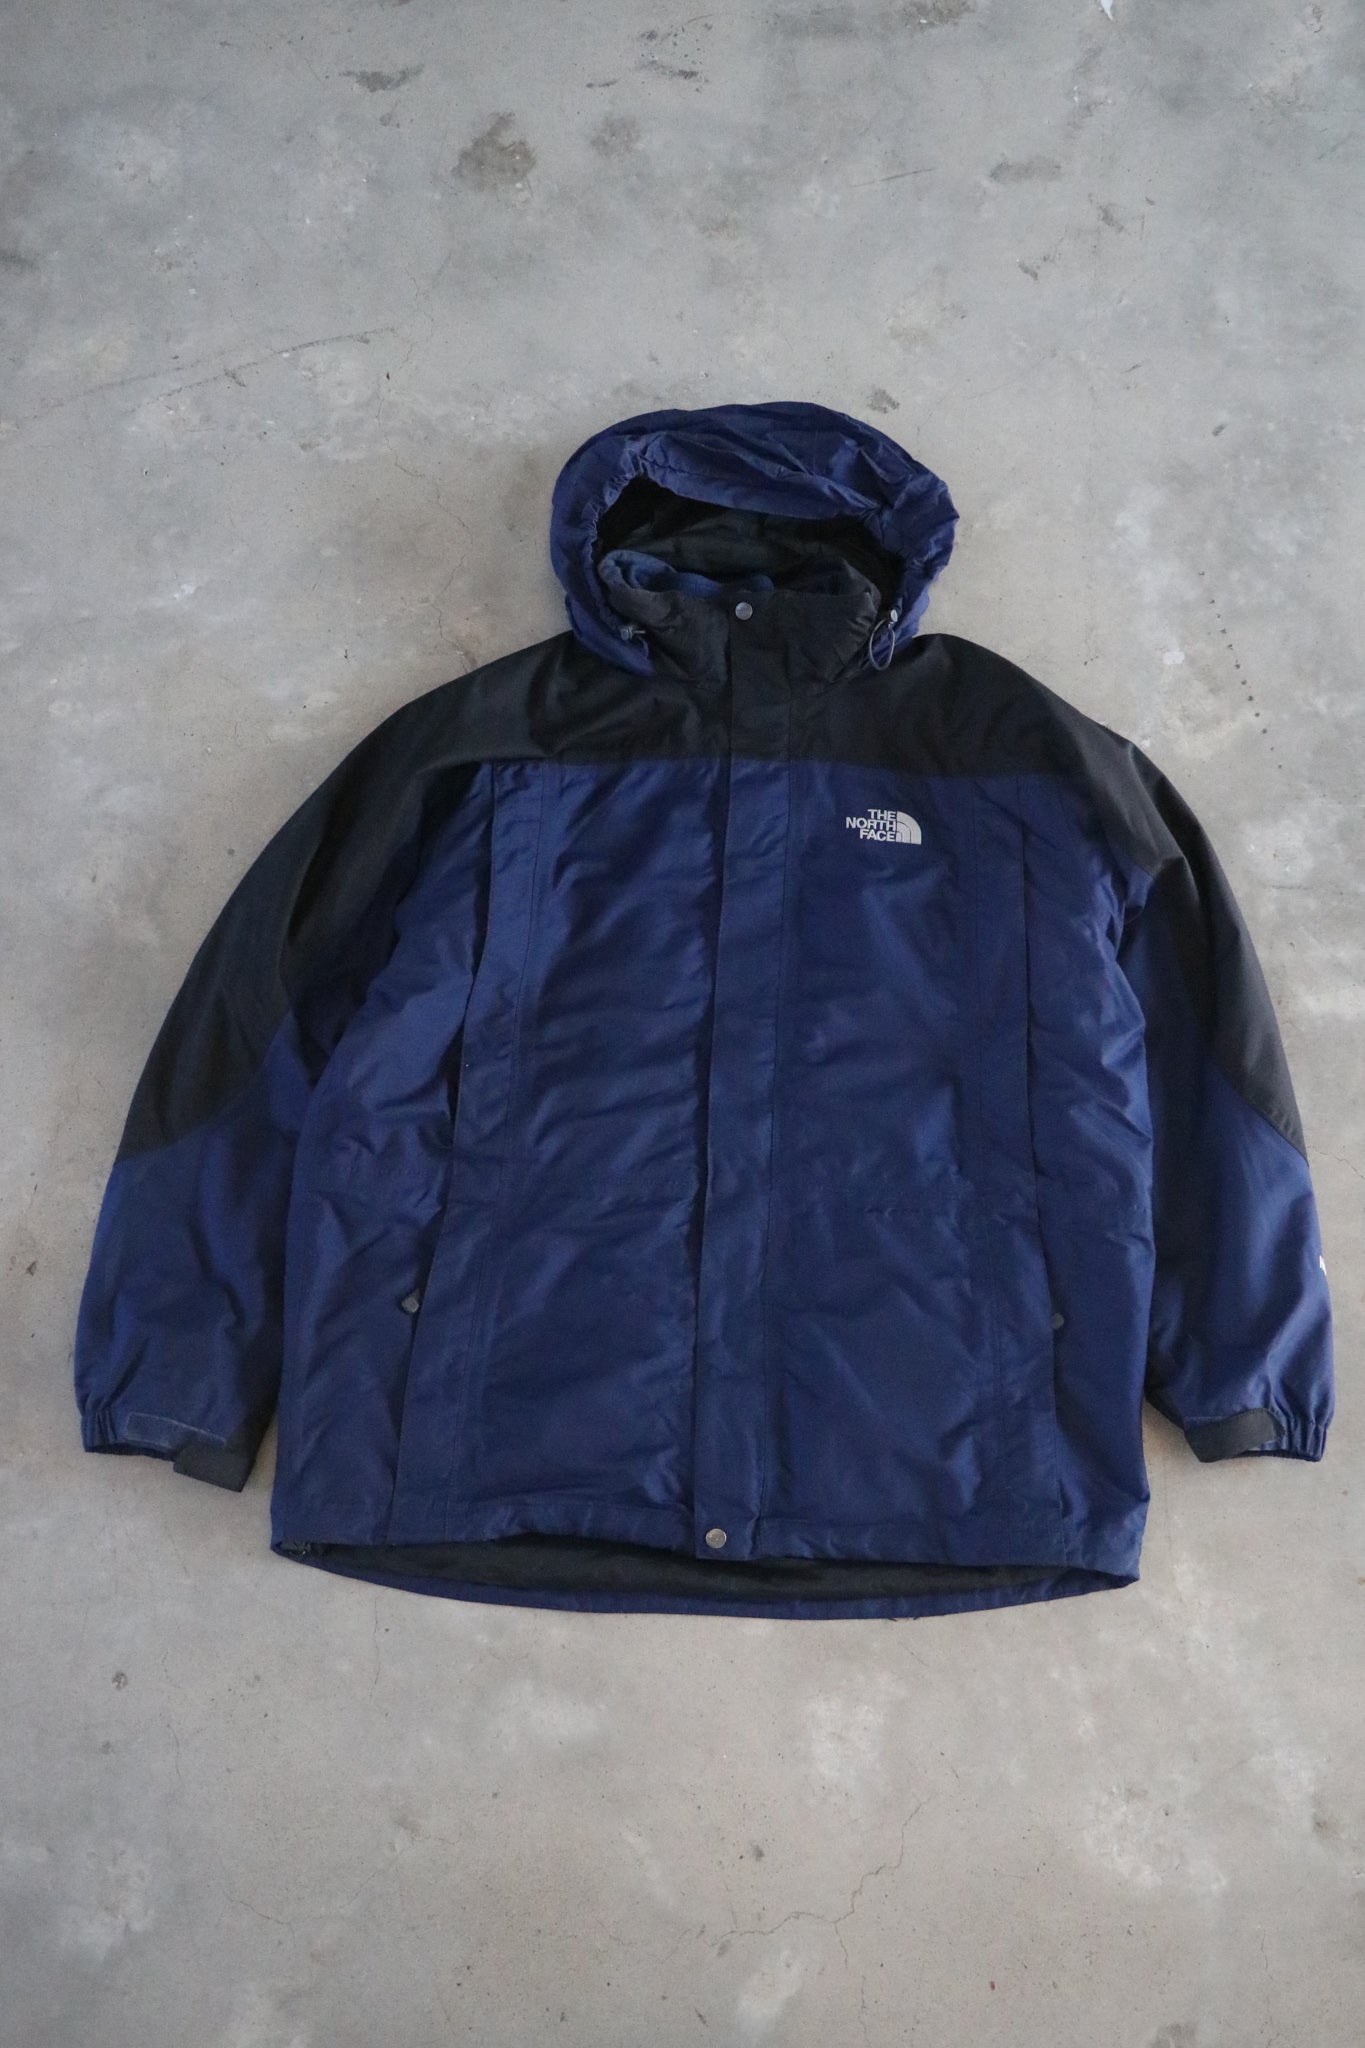 Vintage The North Face 2in 1 HyVent Jacket XL